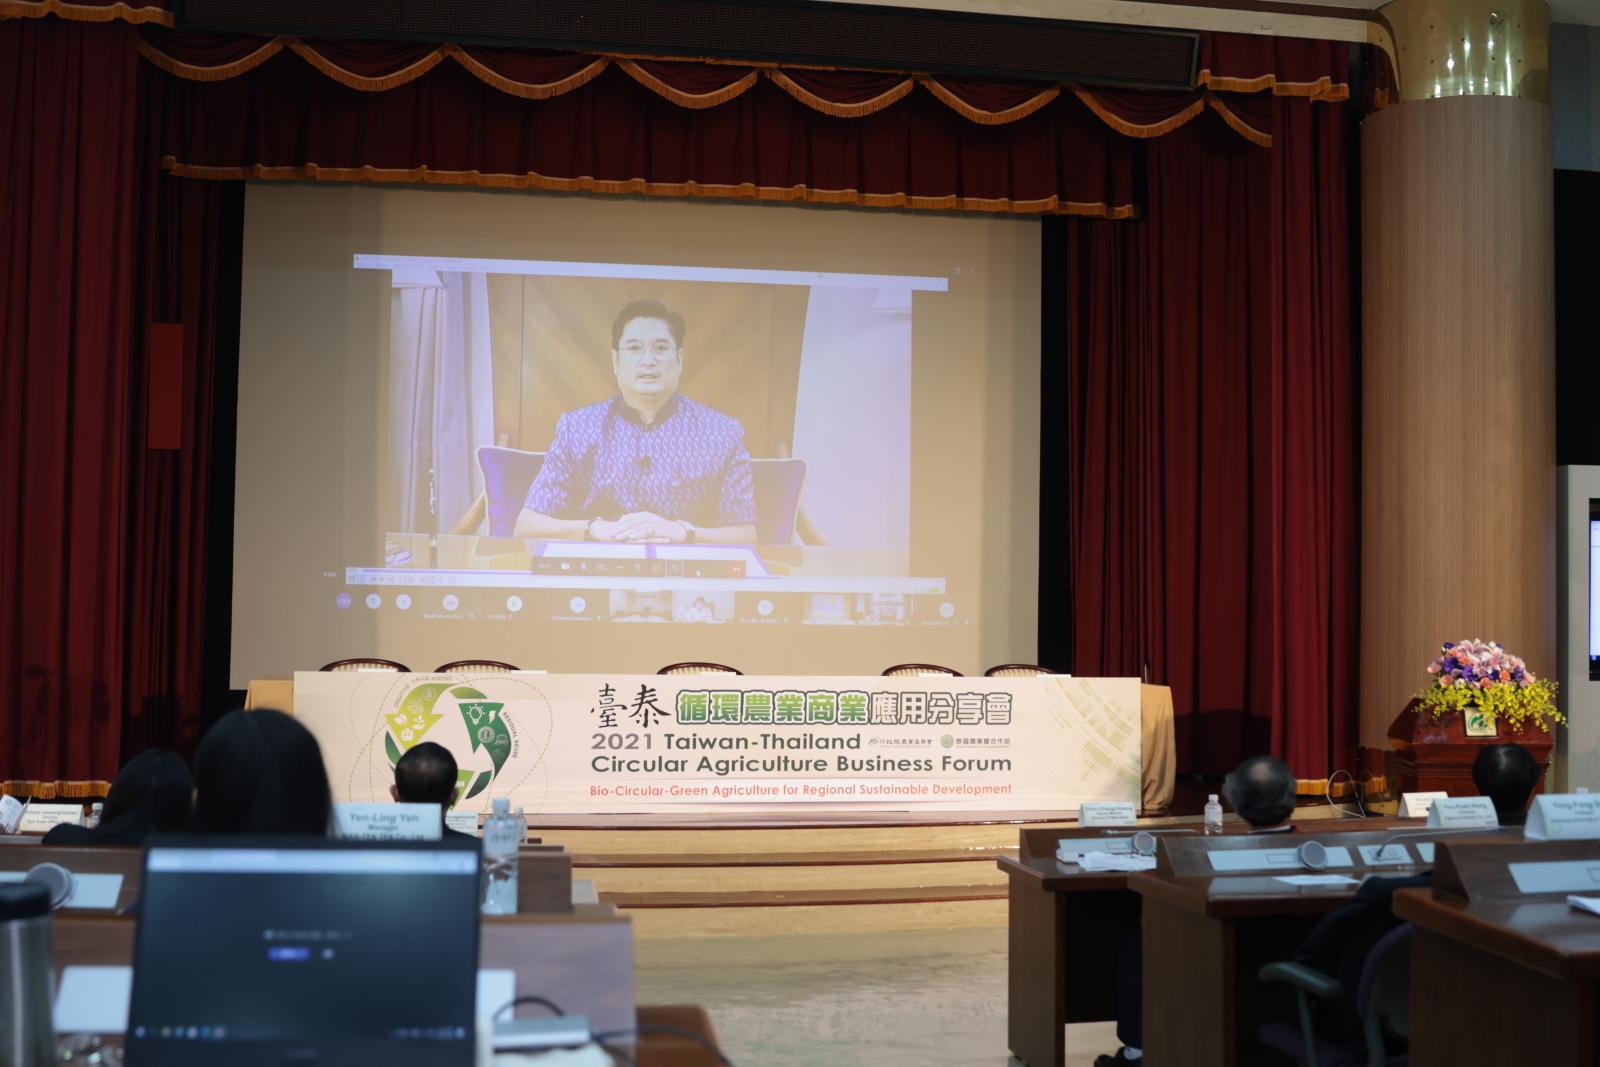 Thailand’s Deputy Minister of Agriculture and Cooperatives delivered remarks online.